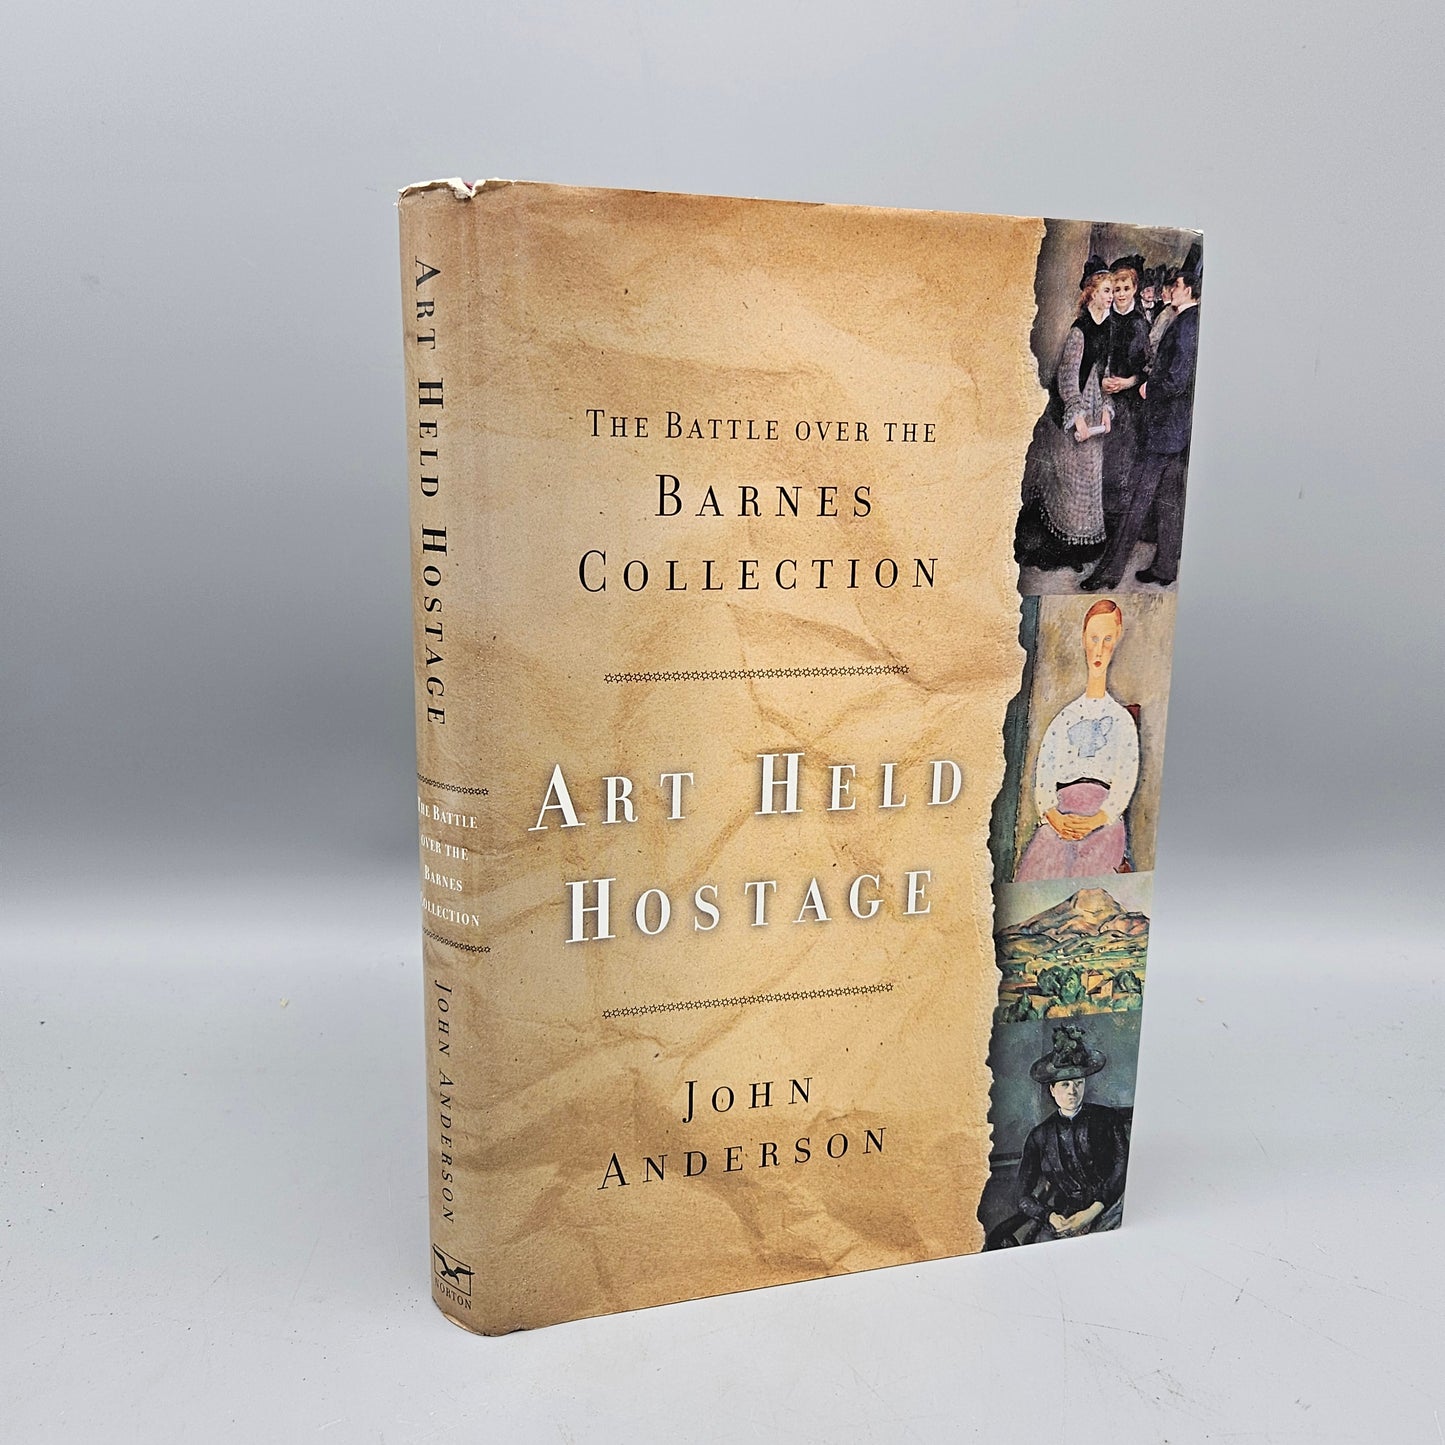 Book: The Battles Over The Barnes Collection Art Held Hostage by John Anderson